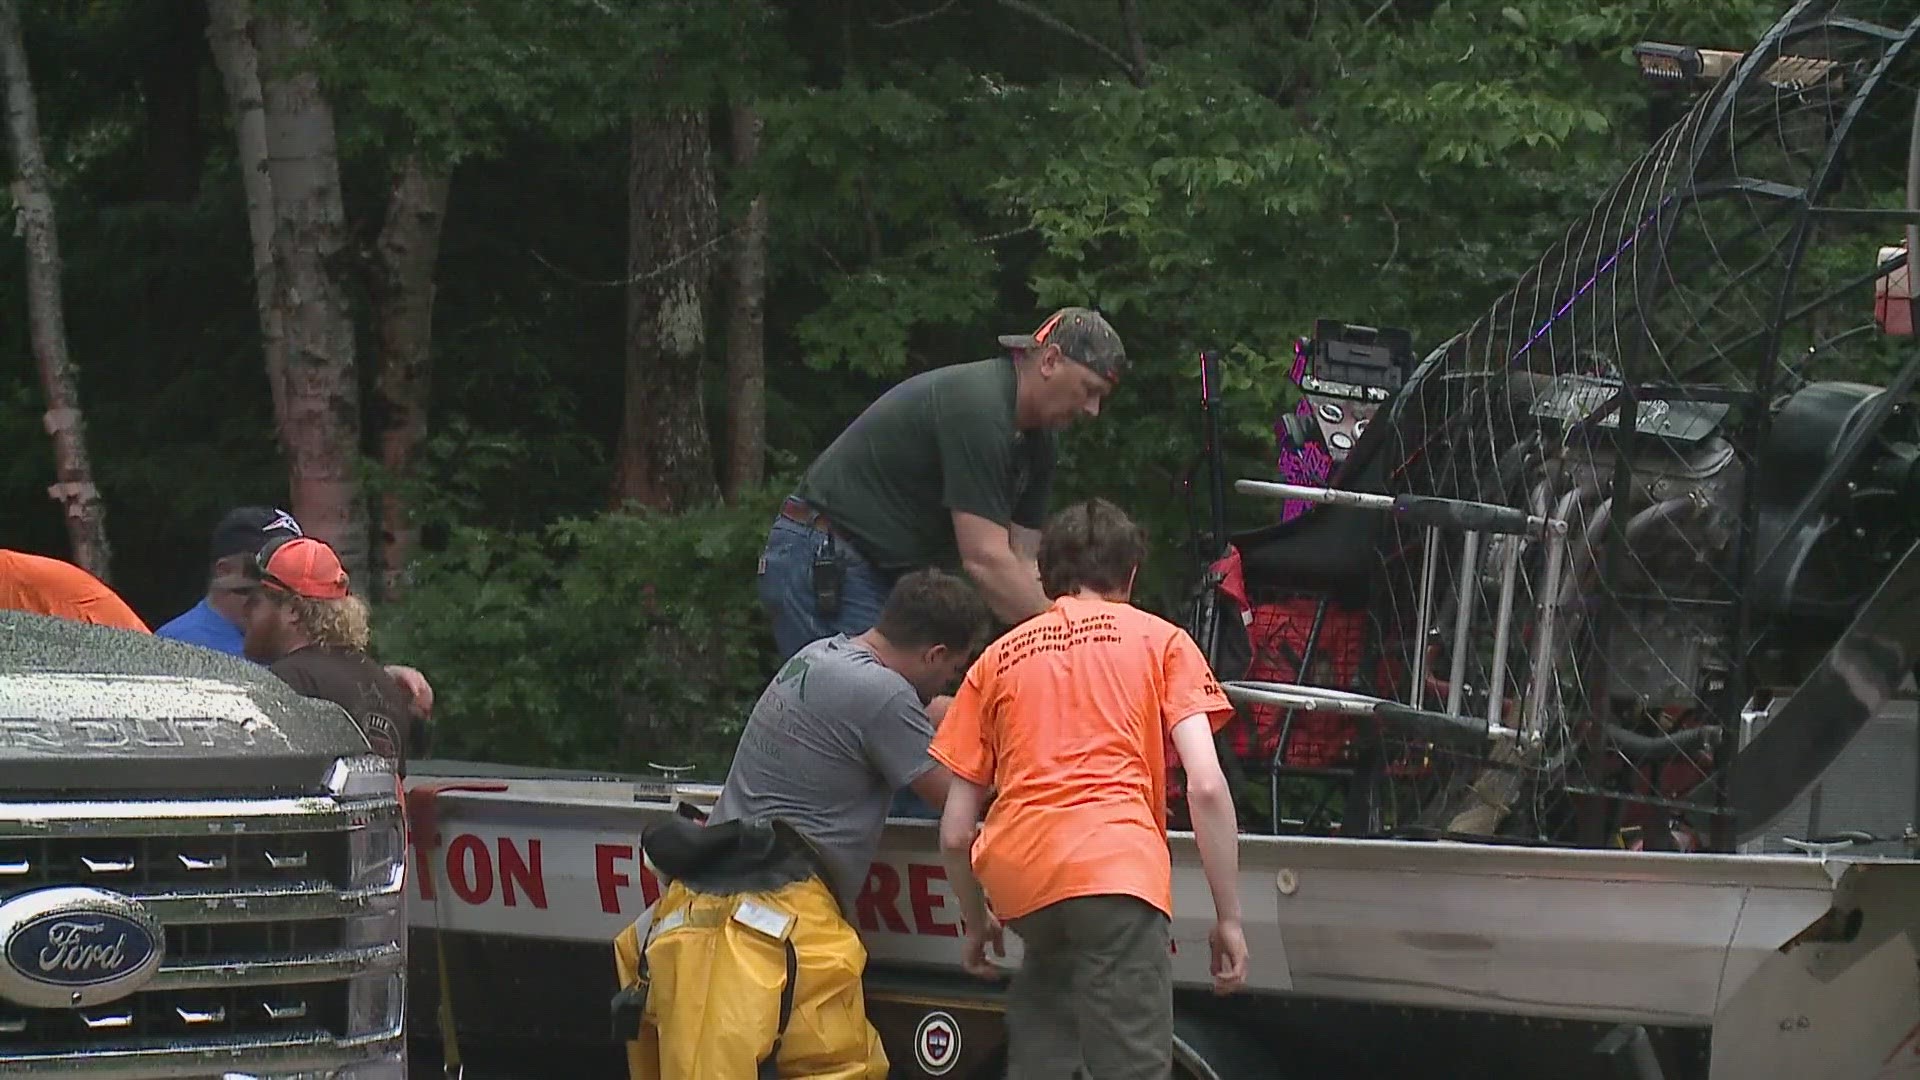 A game warden says they rescued four people from the river Monday.